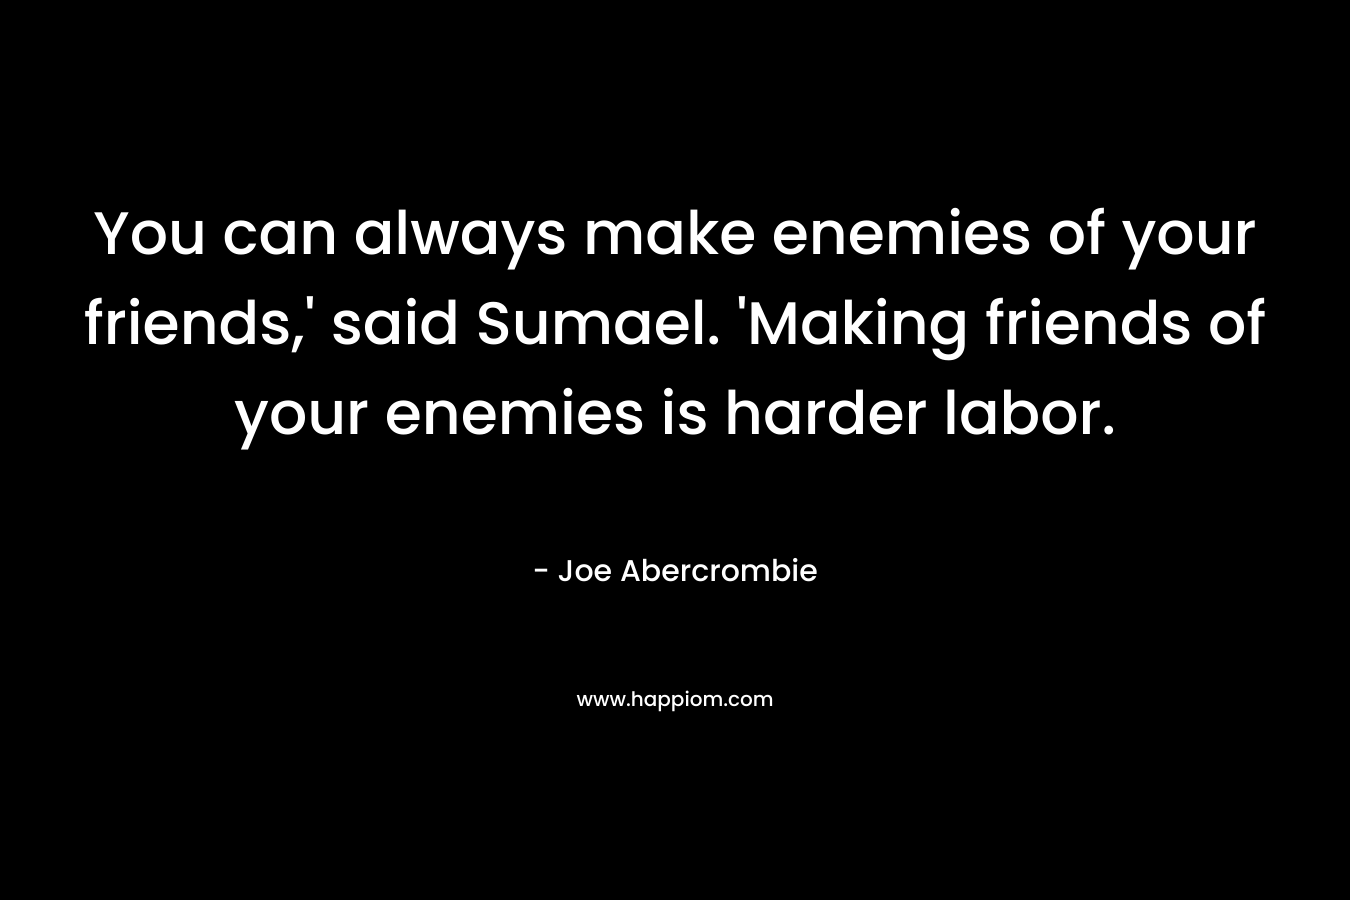 You can always make enemies of your friends,' said Sumael. 'Making friends of your enemies is harder labor.